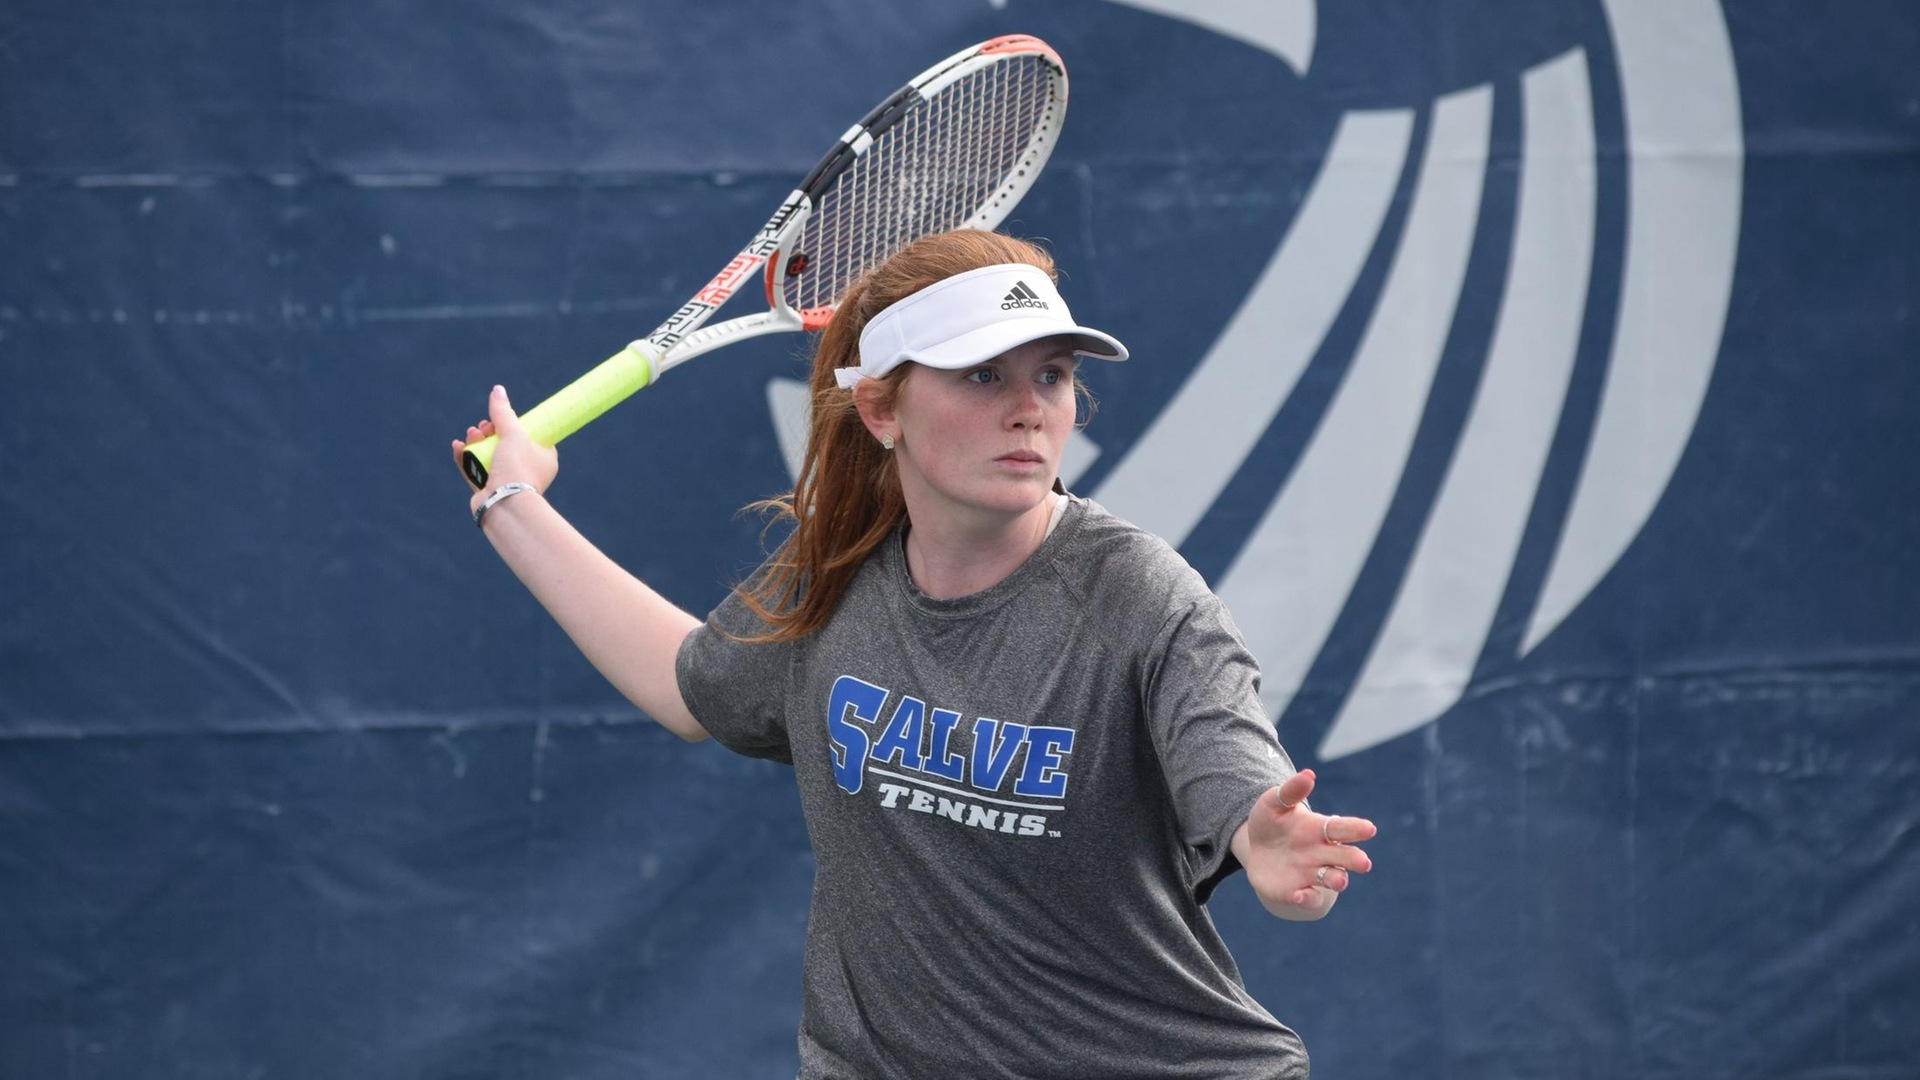 Alexa Stevens won in straight sets at No. 1 Singles on Monday at Clark. (Photo by Ed Habershaw '03M)